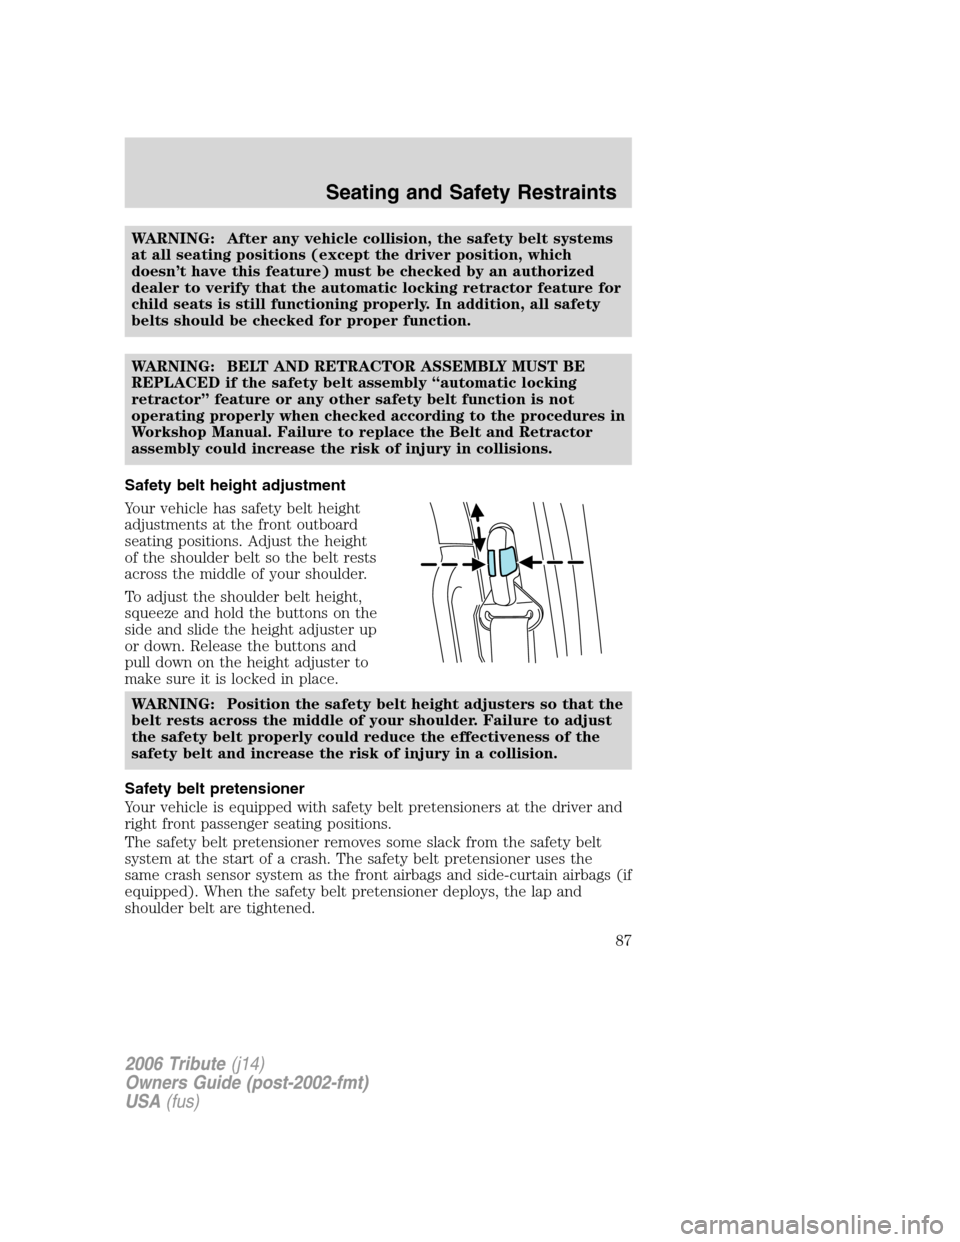 MAZDA MODEL TRIBUTE 2006  Owners Manual (in English) WARNING: After any vehicle collision, the safety belt systems
at all seating positions (except the driver position, which
doesn’t have this feature) must be checked by an authorized
dealer to verify